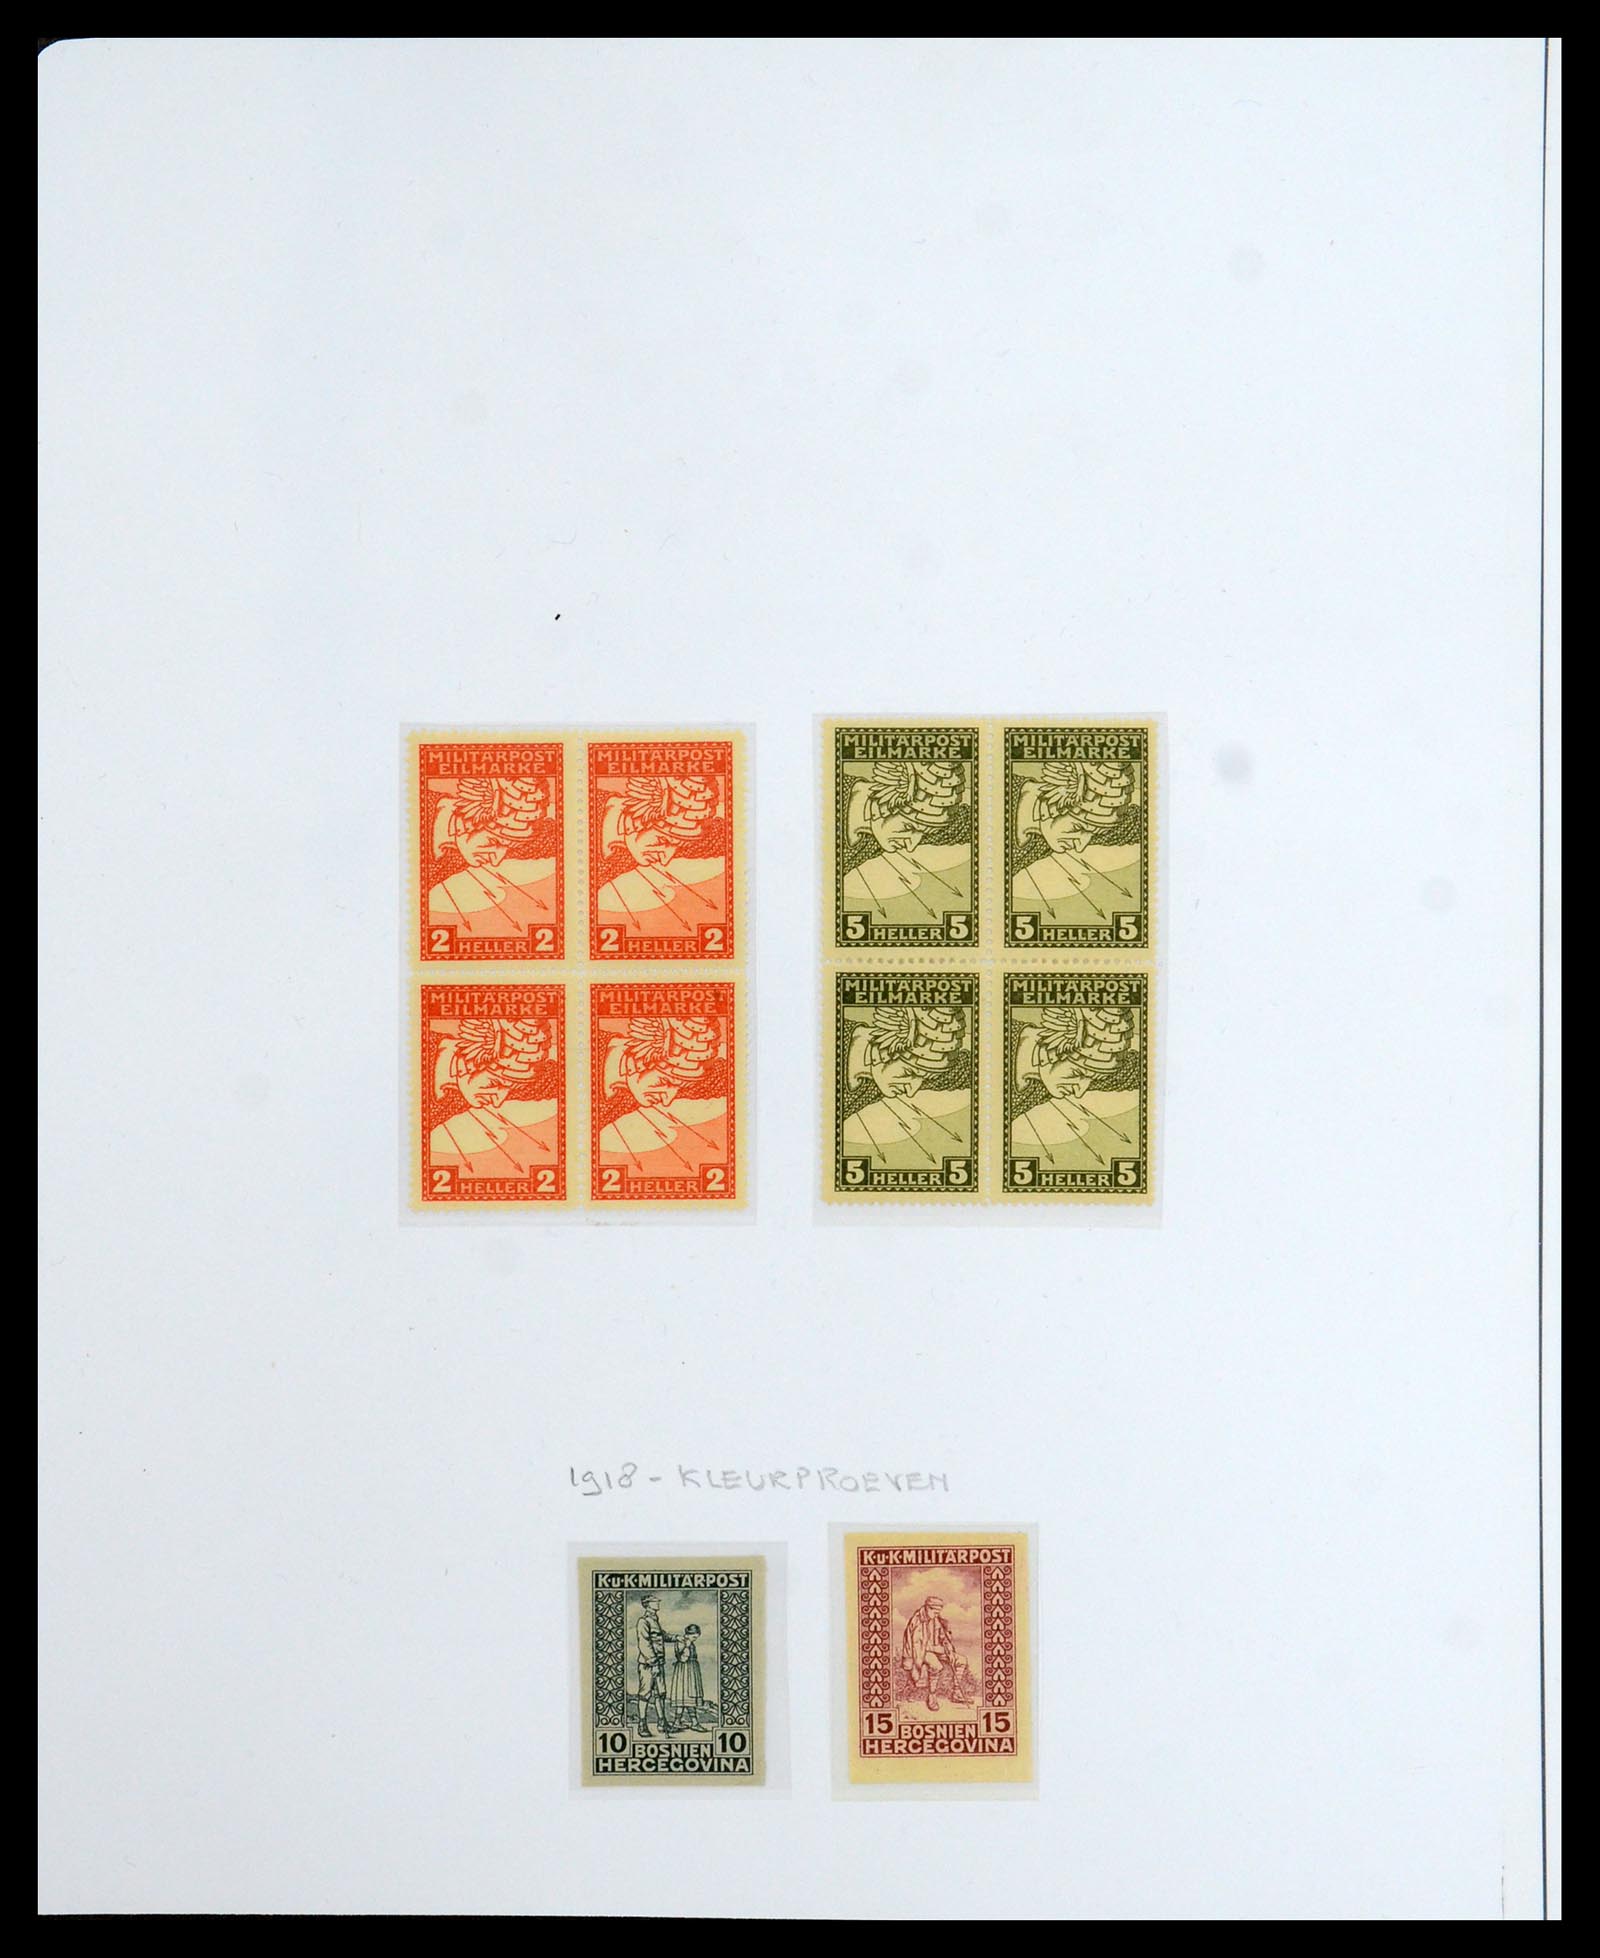 36364 016 - Stamp collection 36364 Austrian territories 1879-1918.